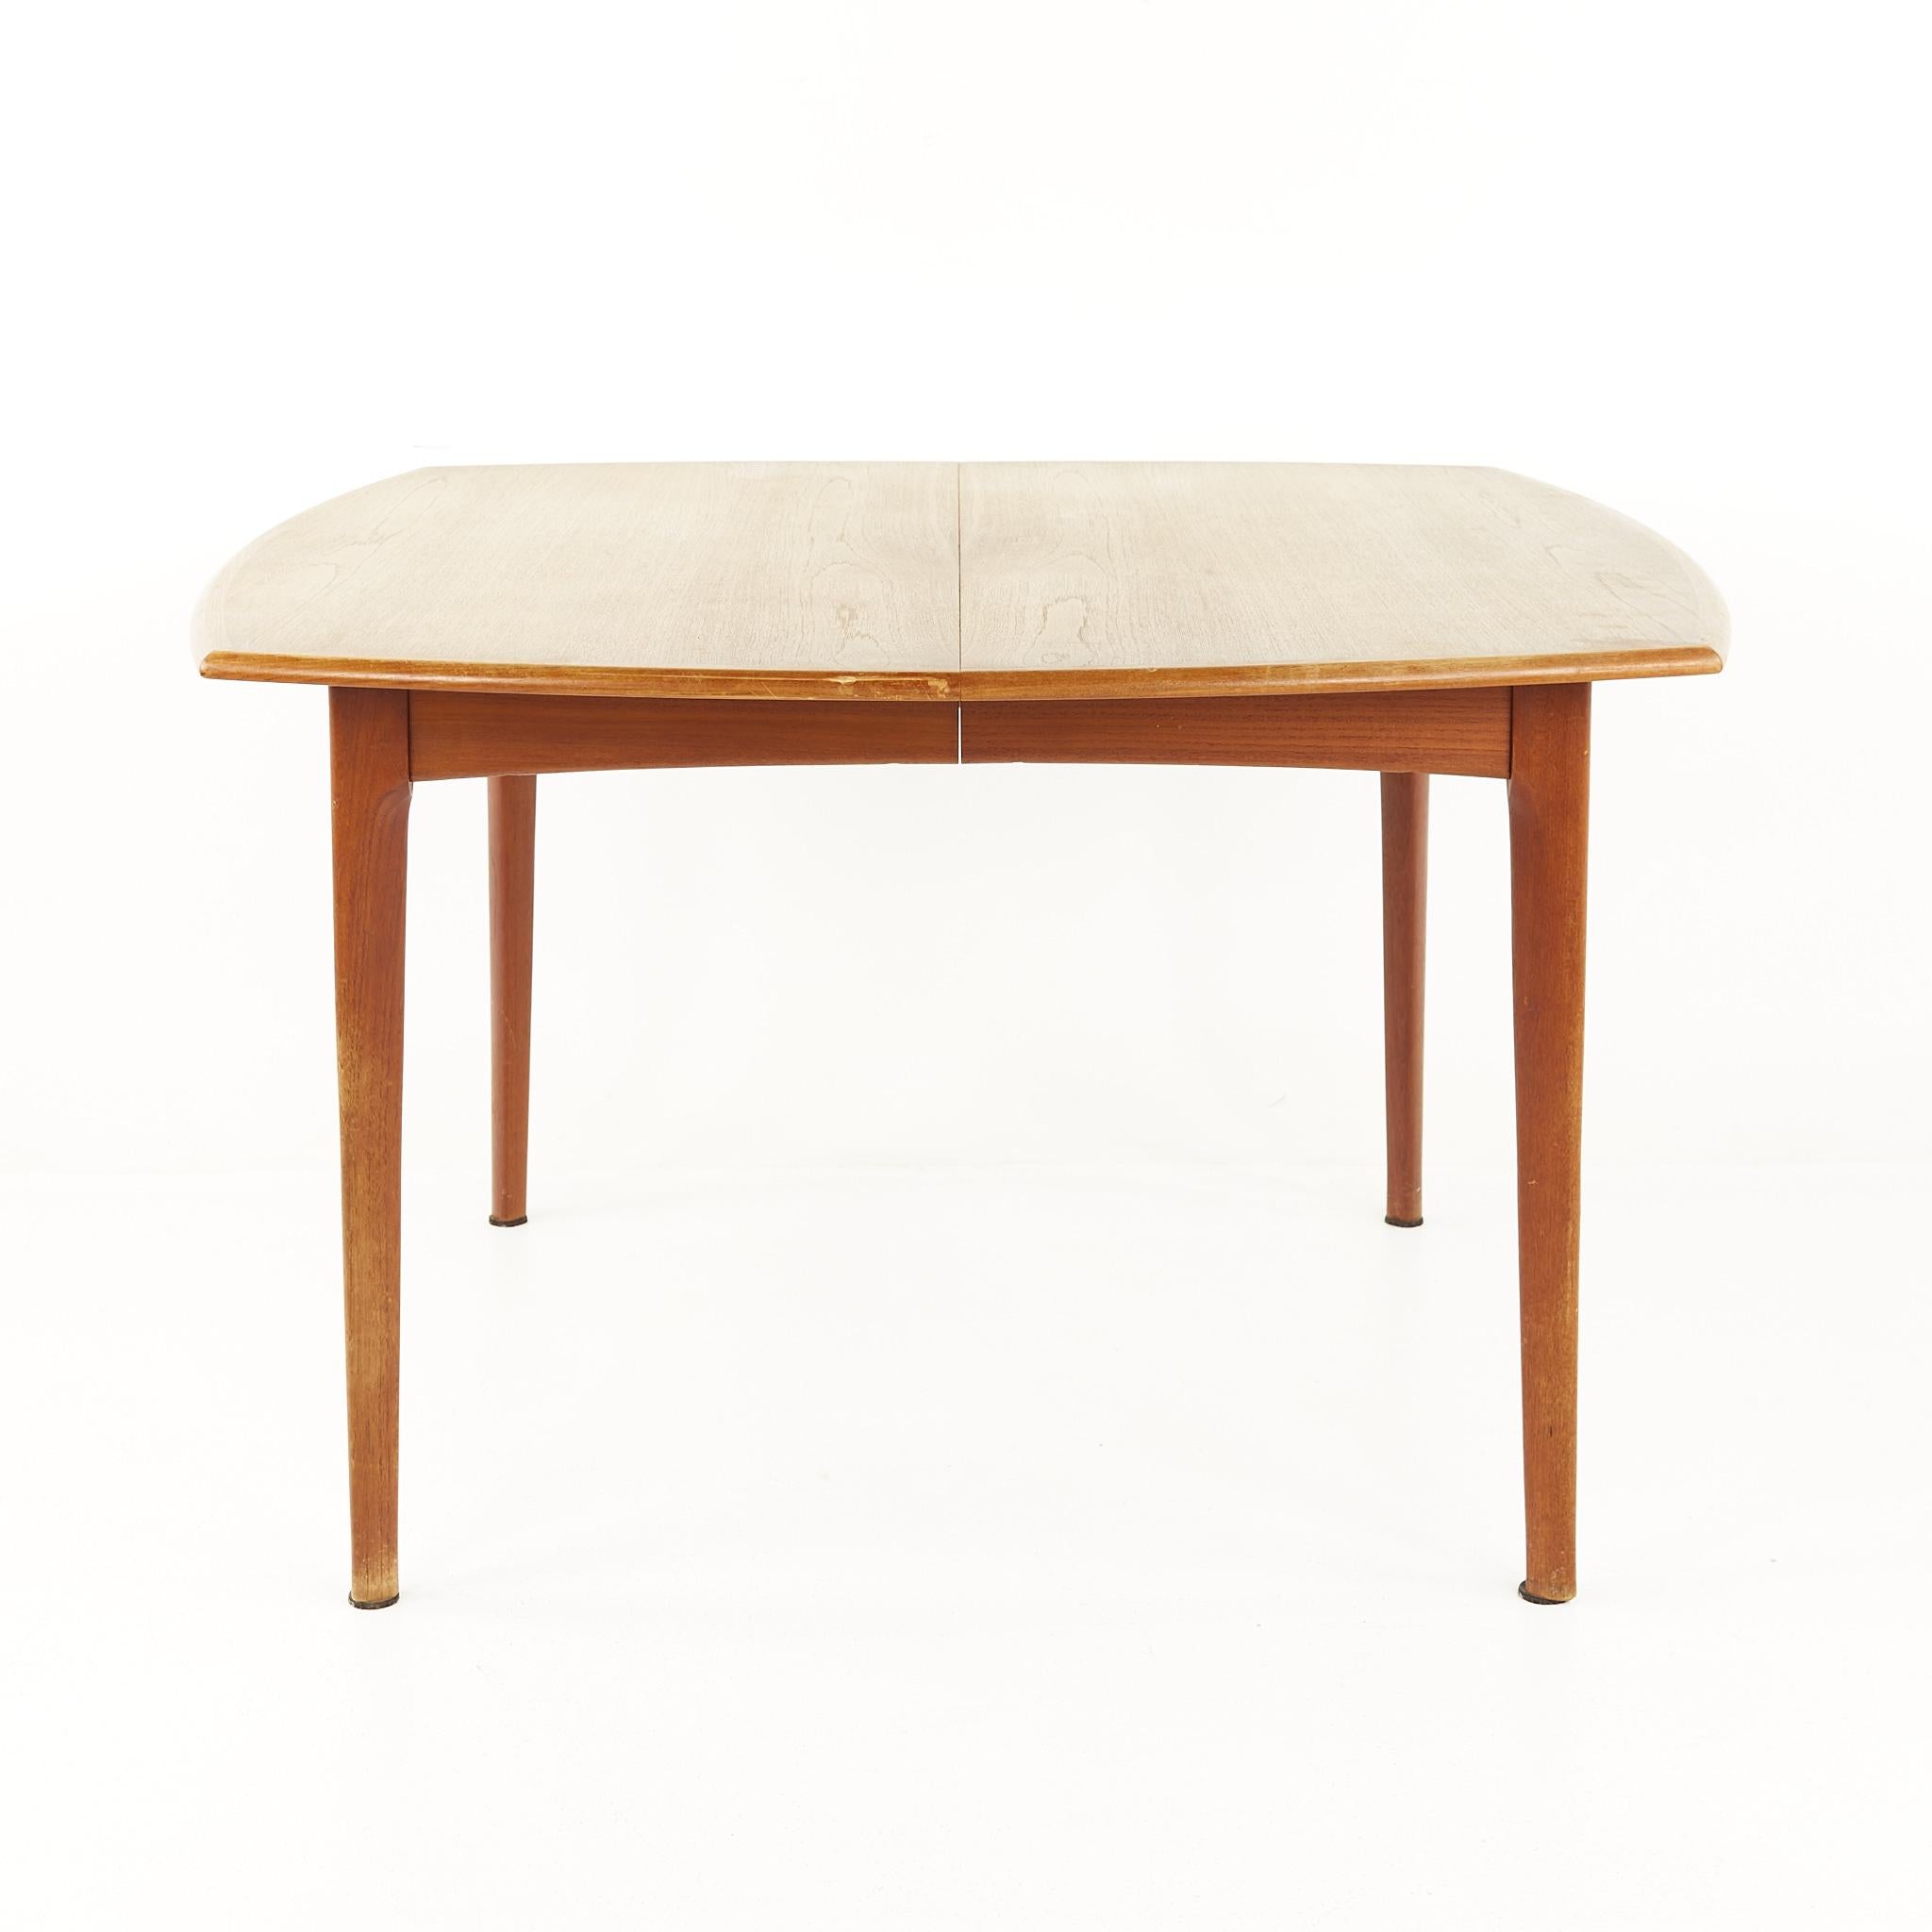 Bramin mid century Danish teak hidden leaf dining table

The table measures: 47.25 wide x 47.25 deep x 27.75 high, with a chair clearance of 24.75 inches; each leaf is 29.5 inches wide, making a maximum table width of 106.25 inches when both